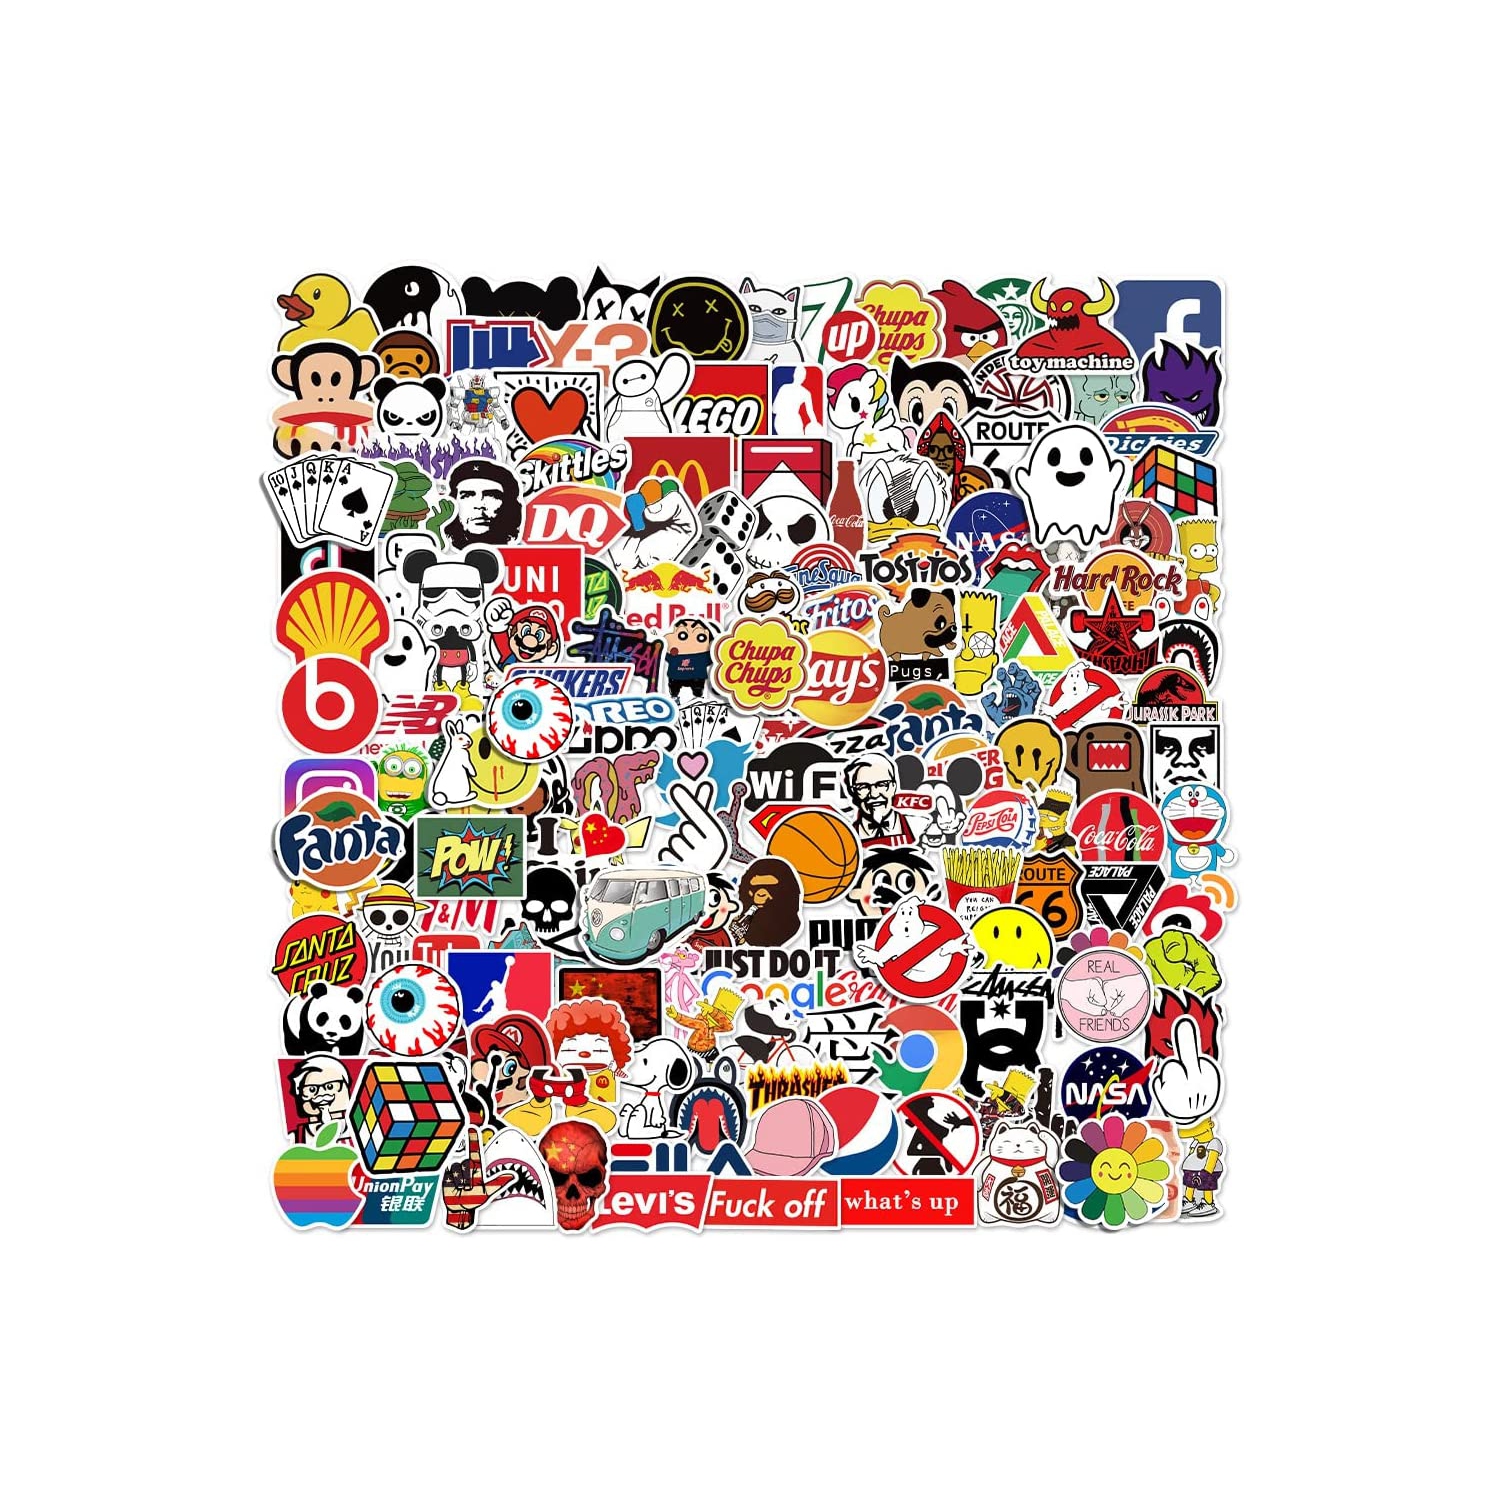 Fashion Stickers Pack 201 pcs Cool Stickers for Laptop Computer Water Botter Car Skateboard Waterproof Vinyl